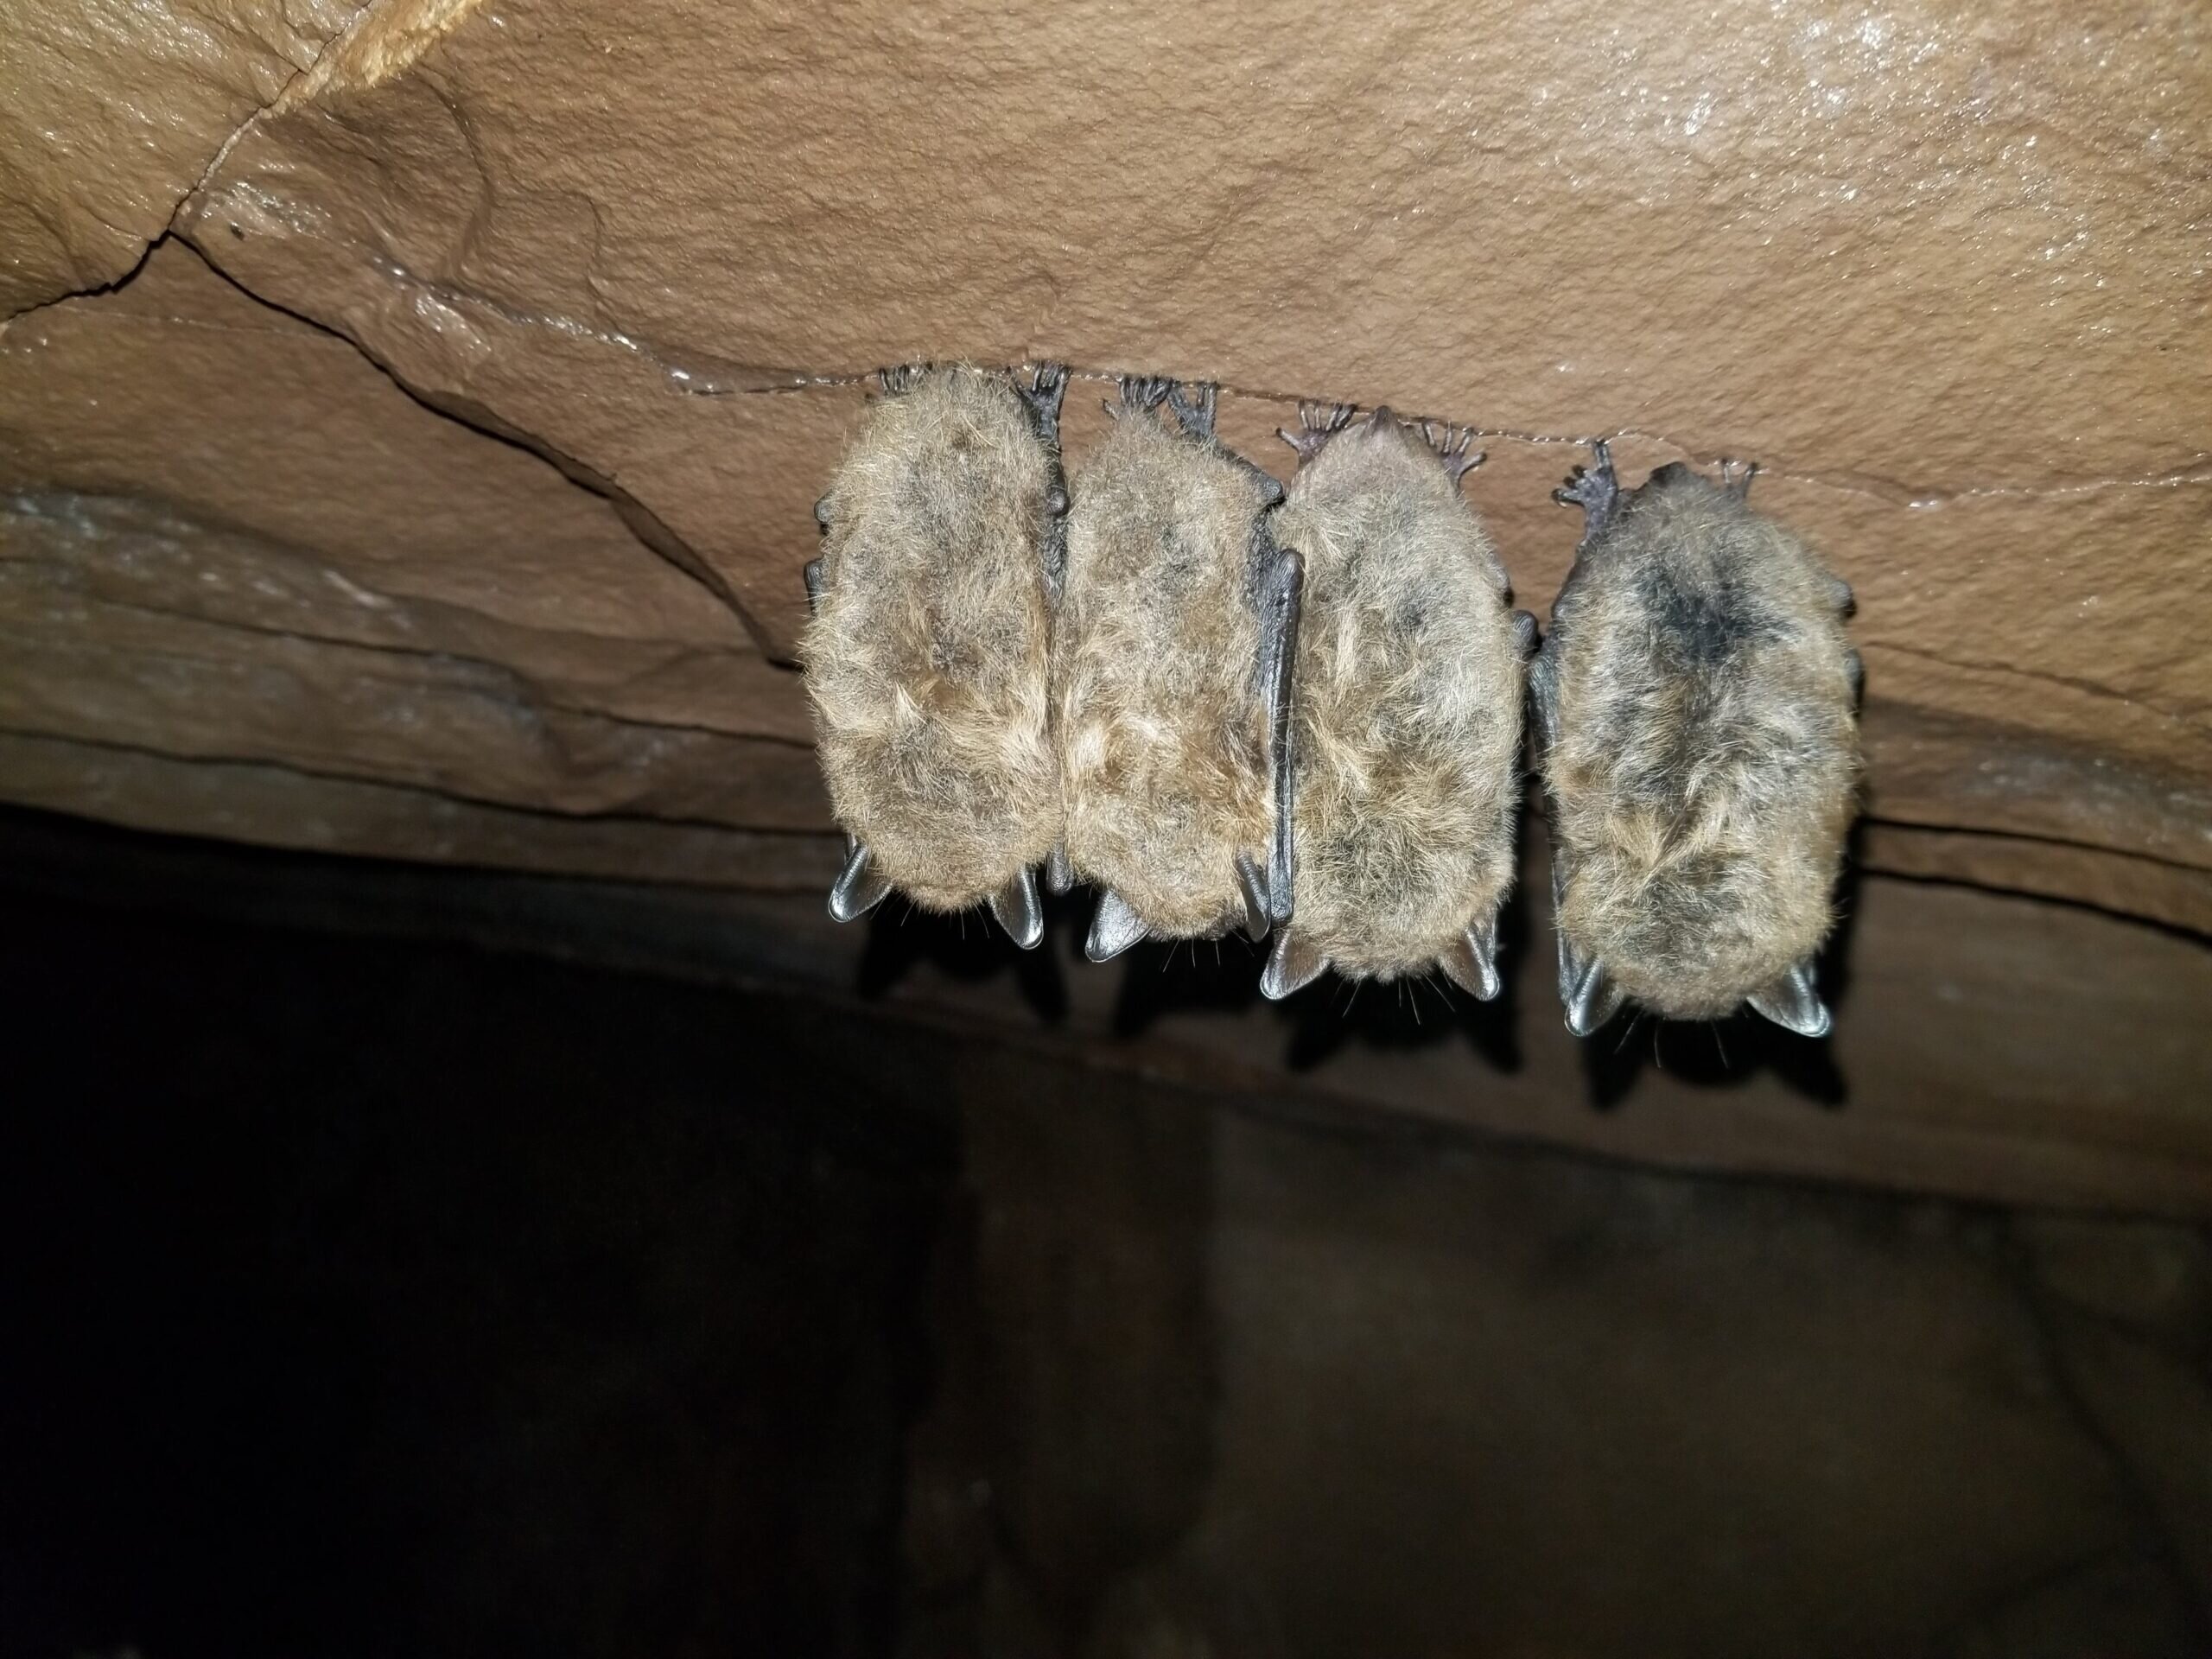 photo of First genetic evidence of resistance in some bats to white-nose syndrome, a devastating fungal disease image